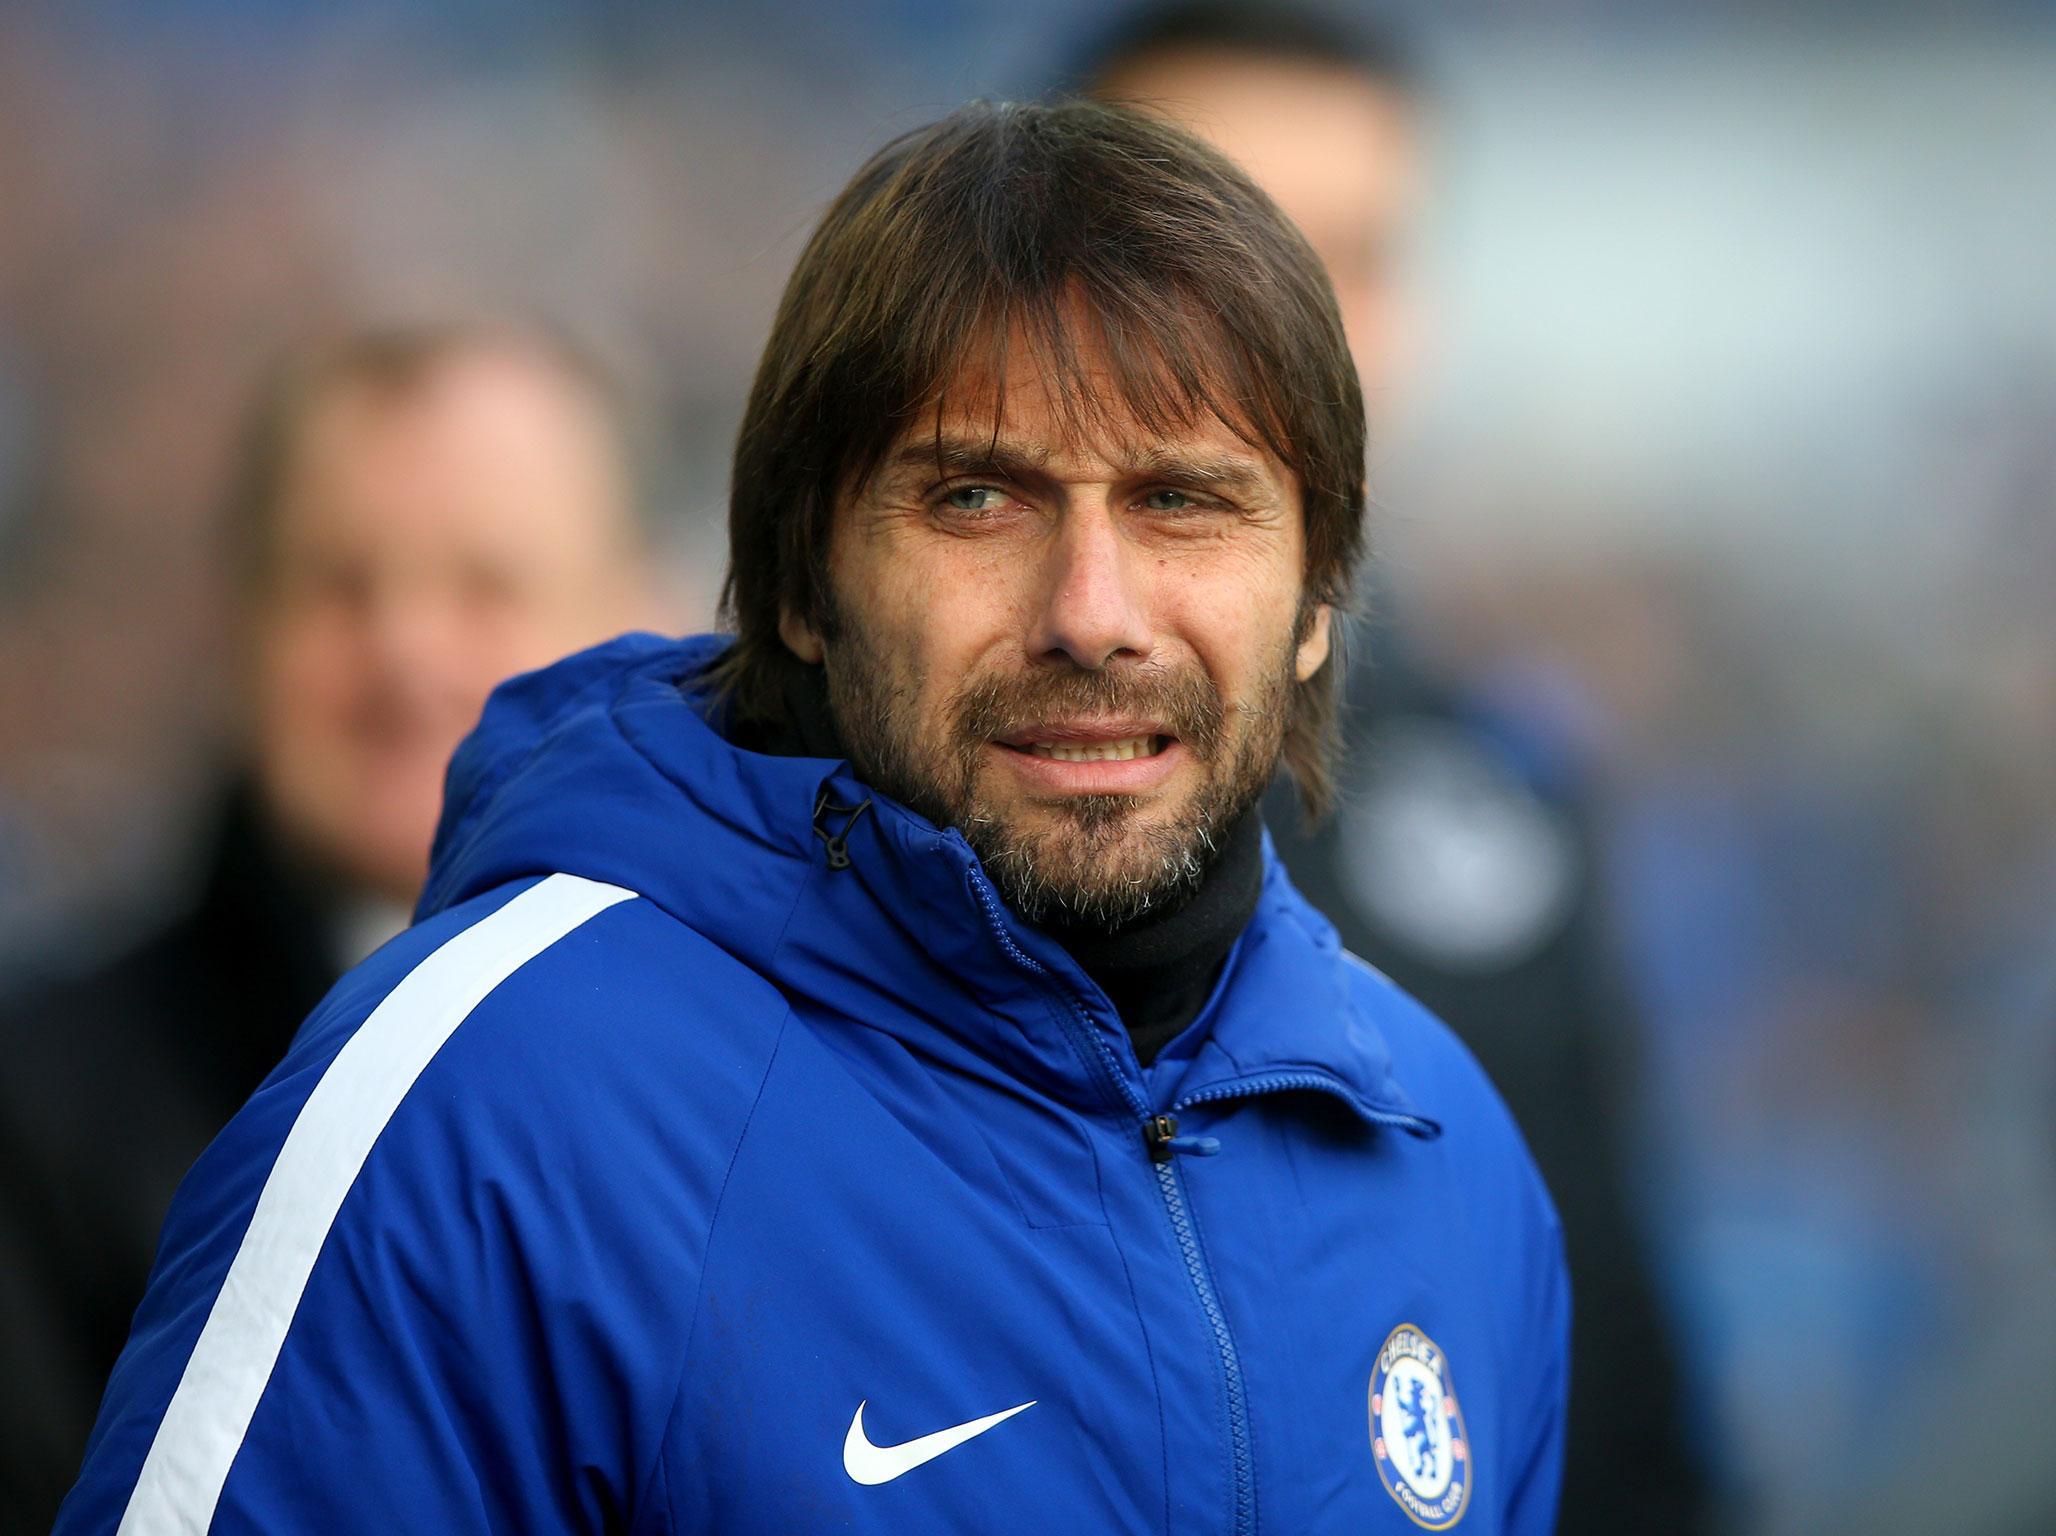 Antonio Conte defended his selection at Goodison Park